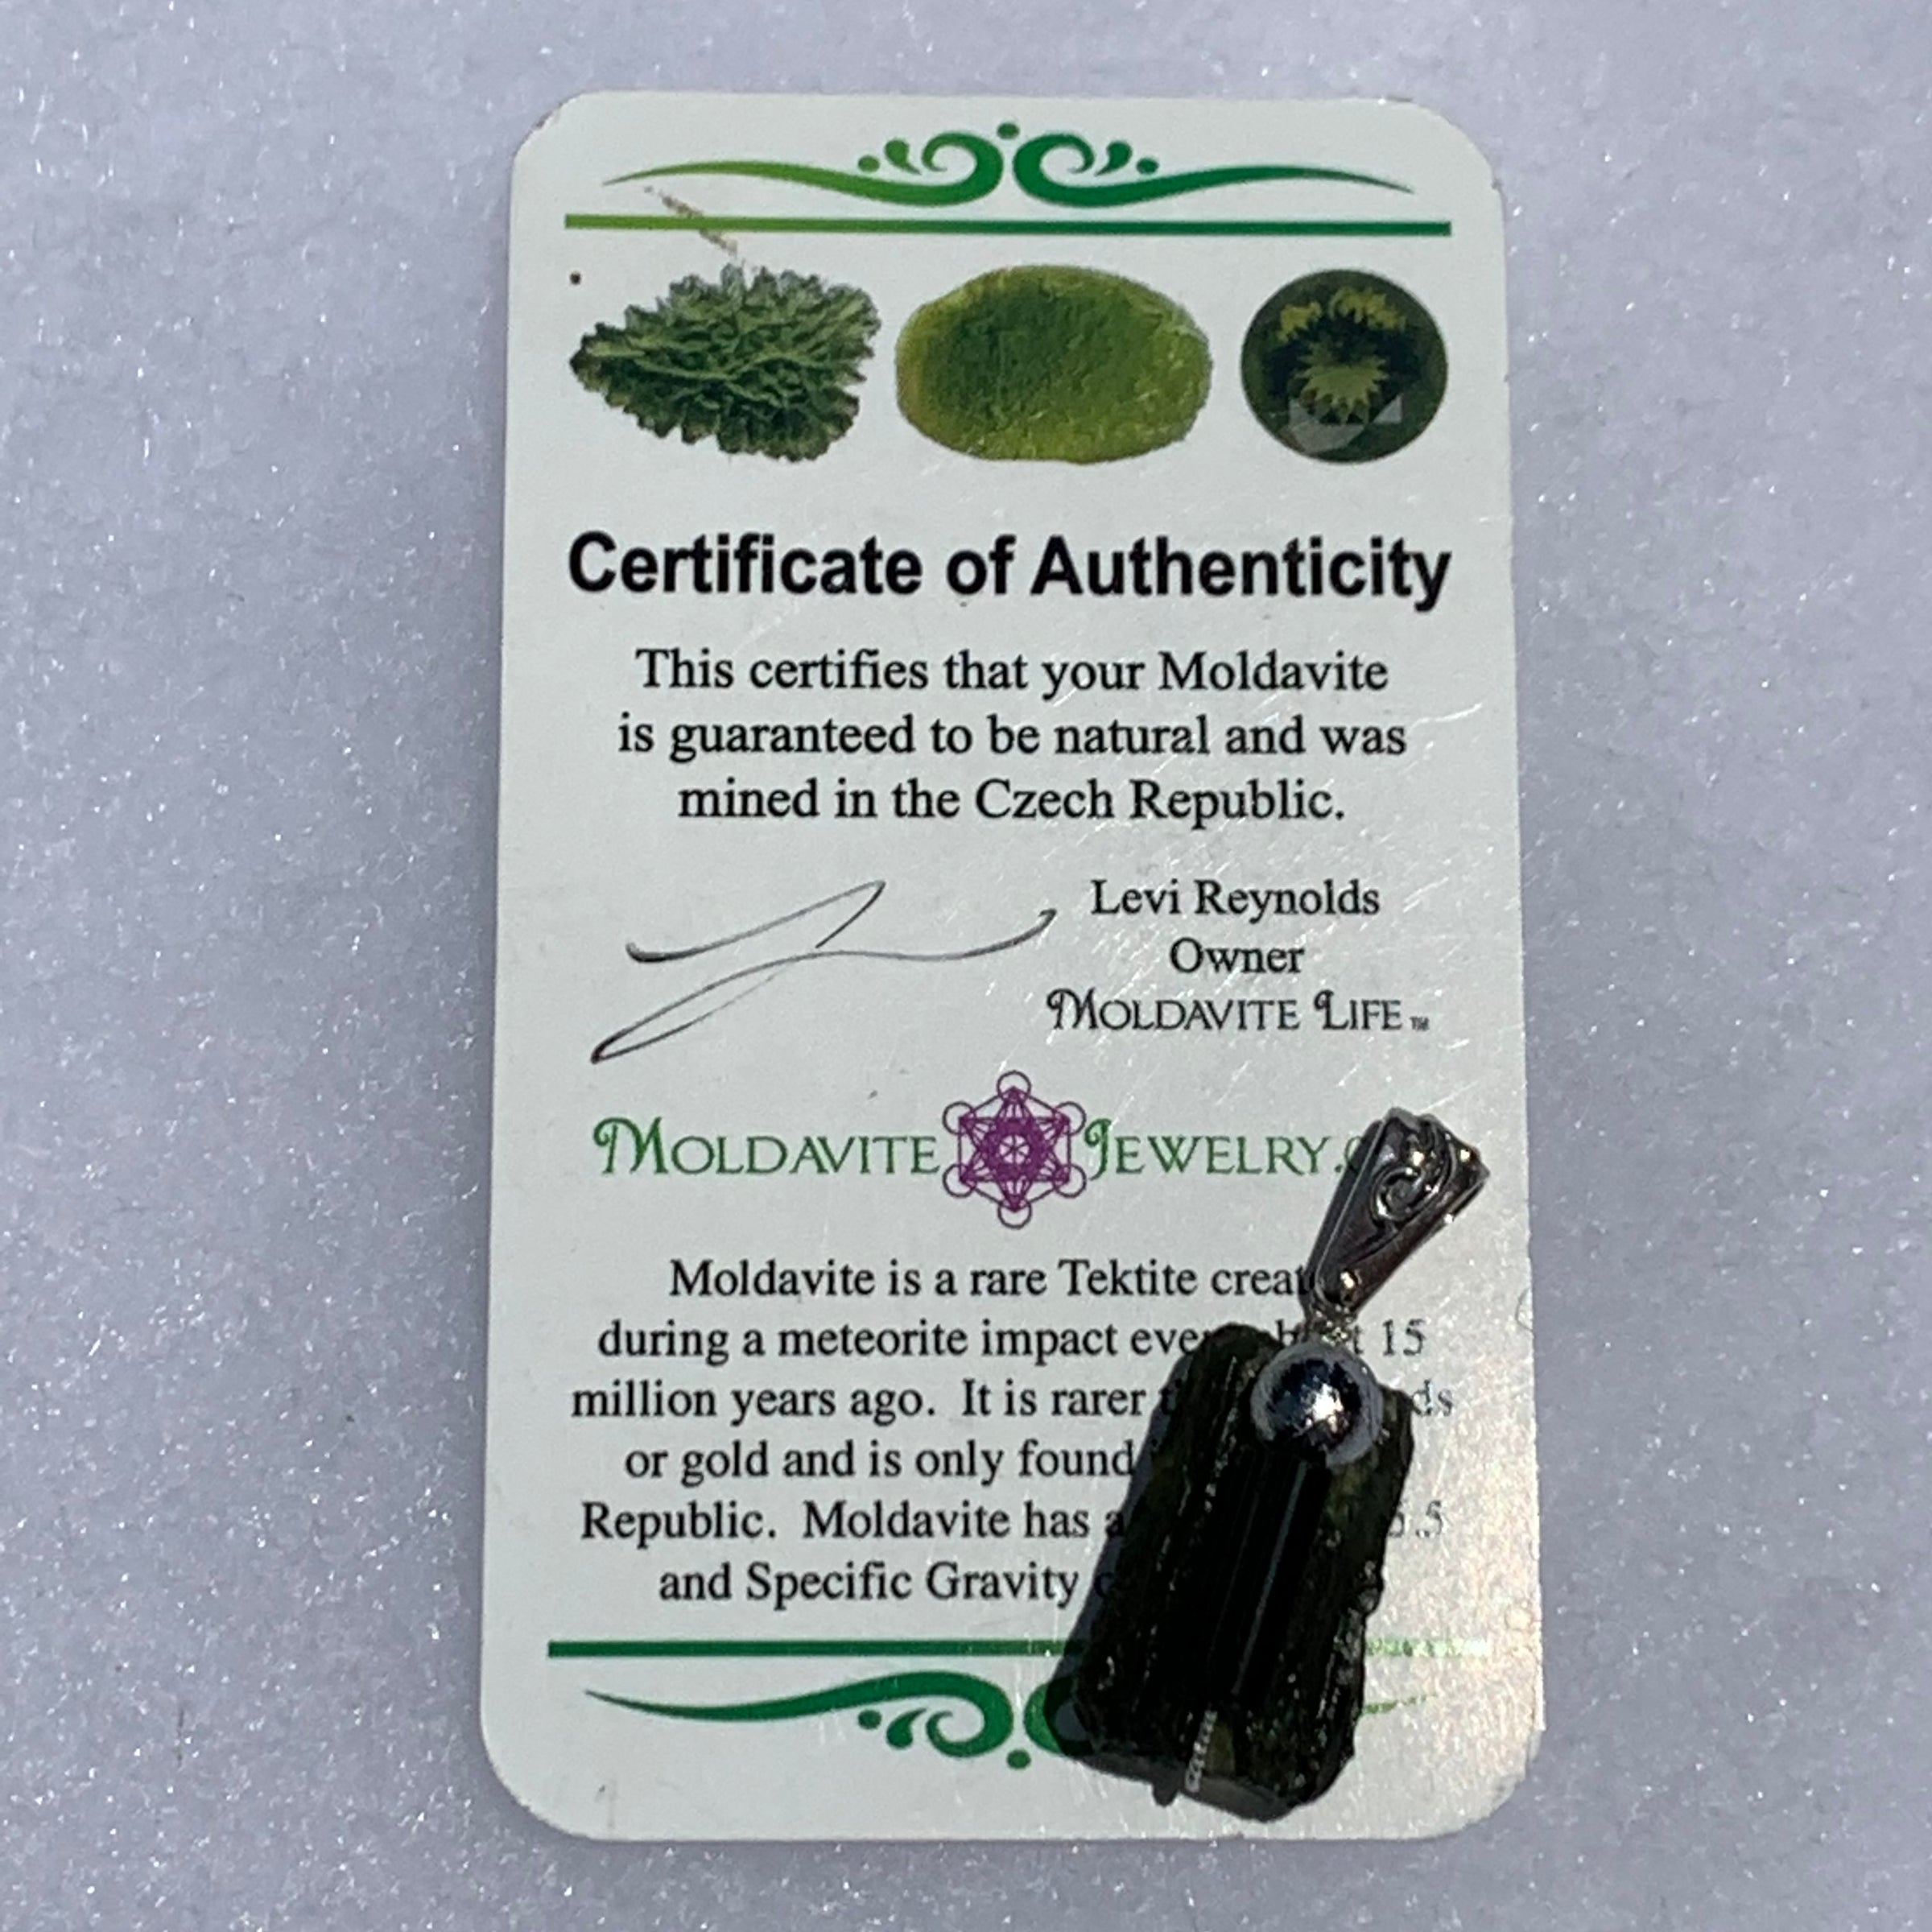 the pendant sits on a moldavite life certificate of authenticity